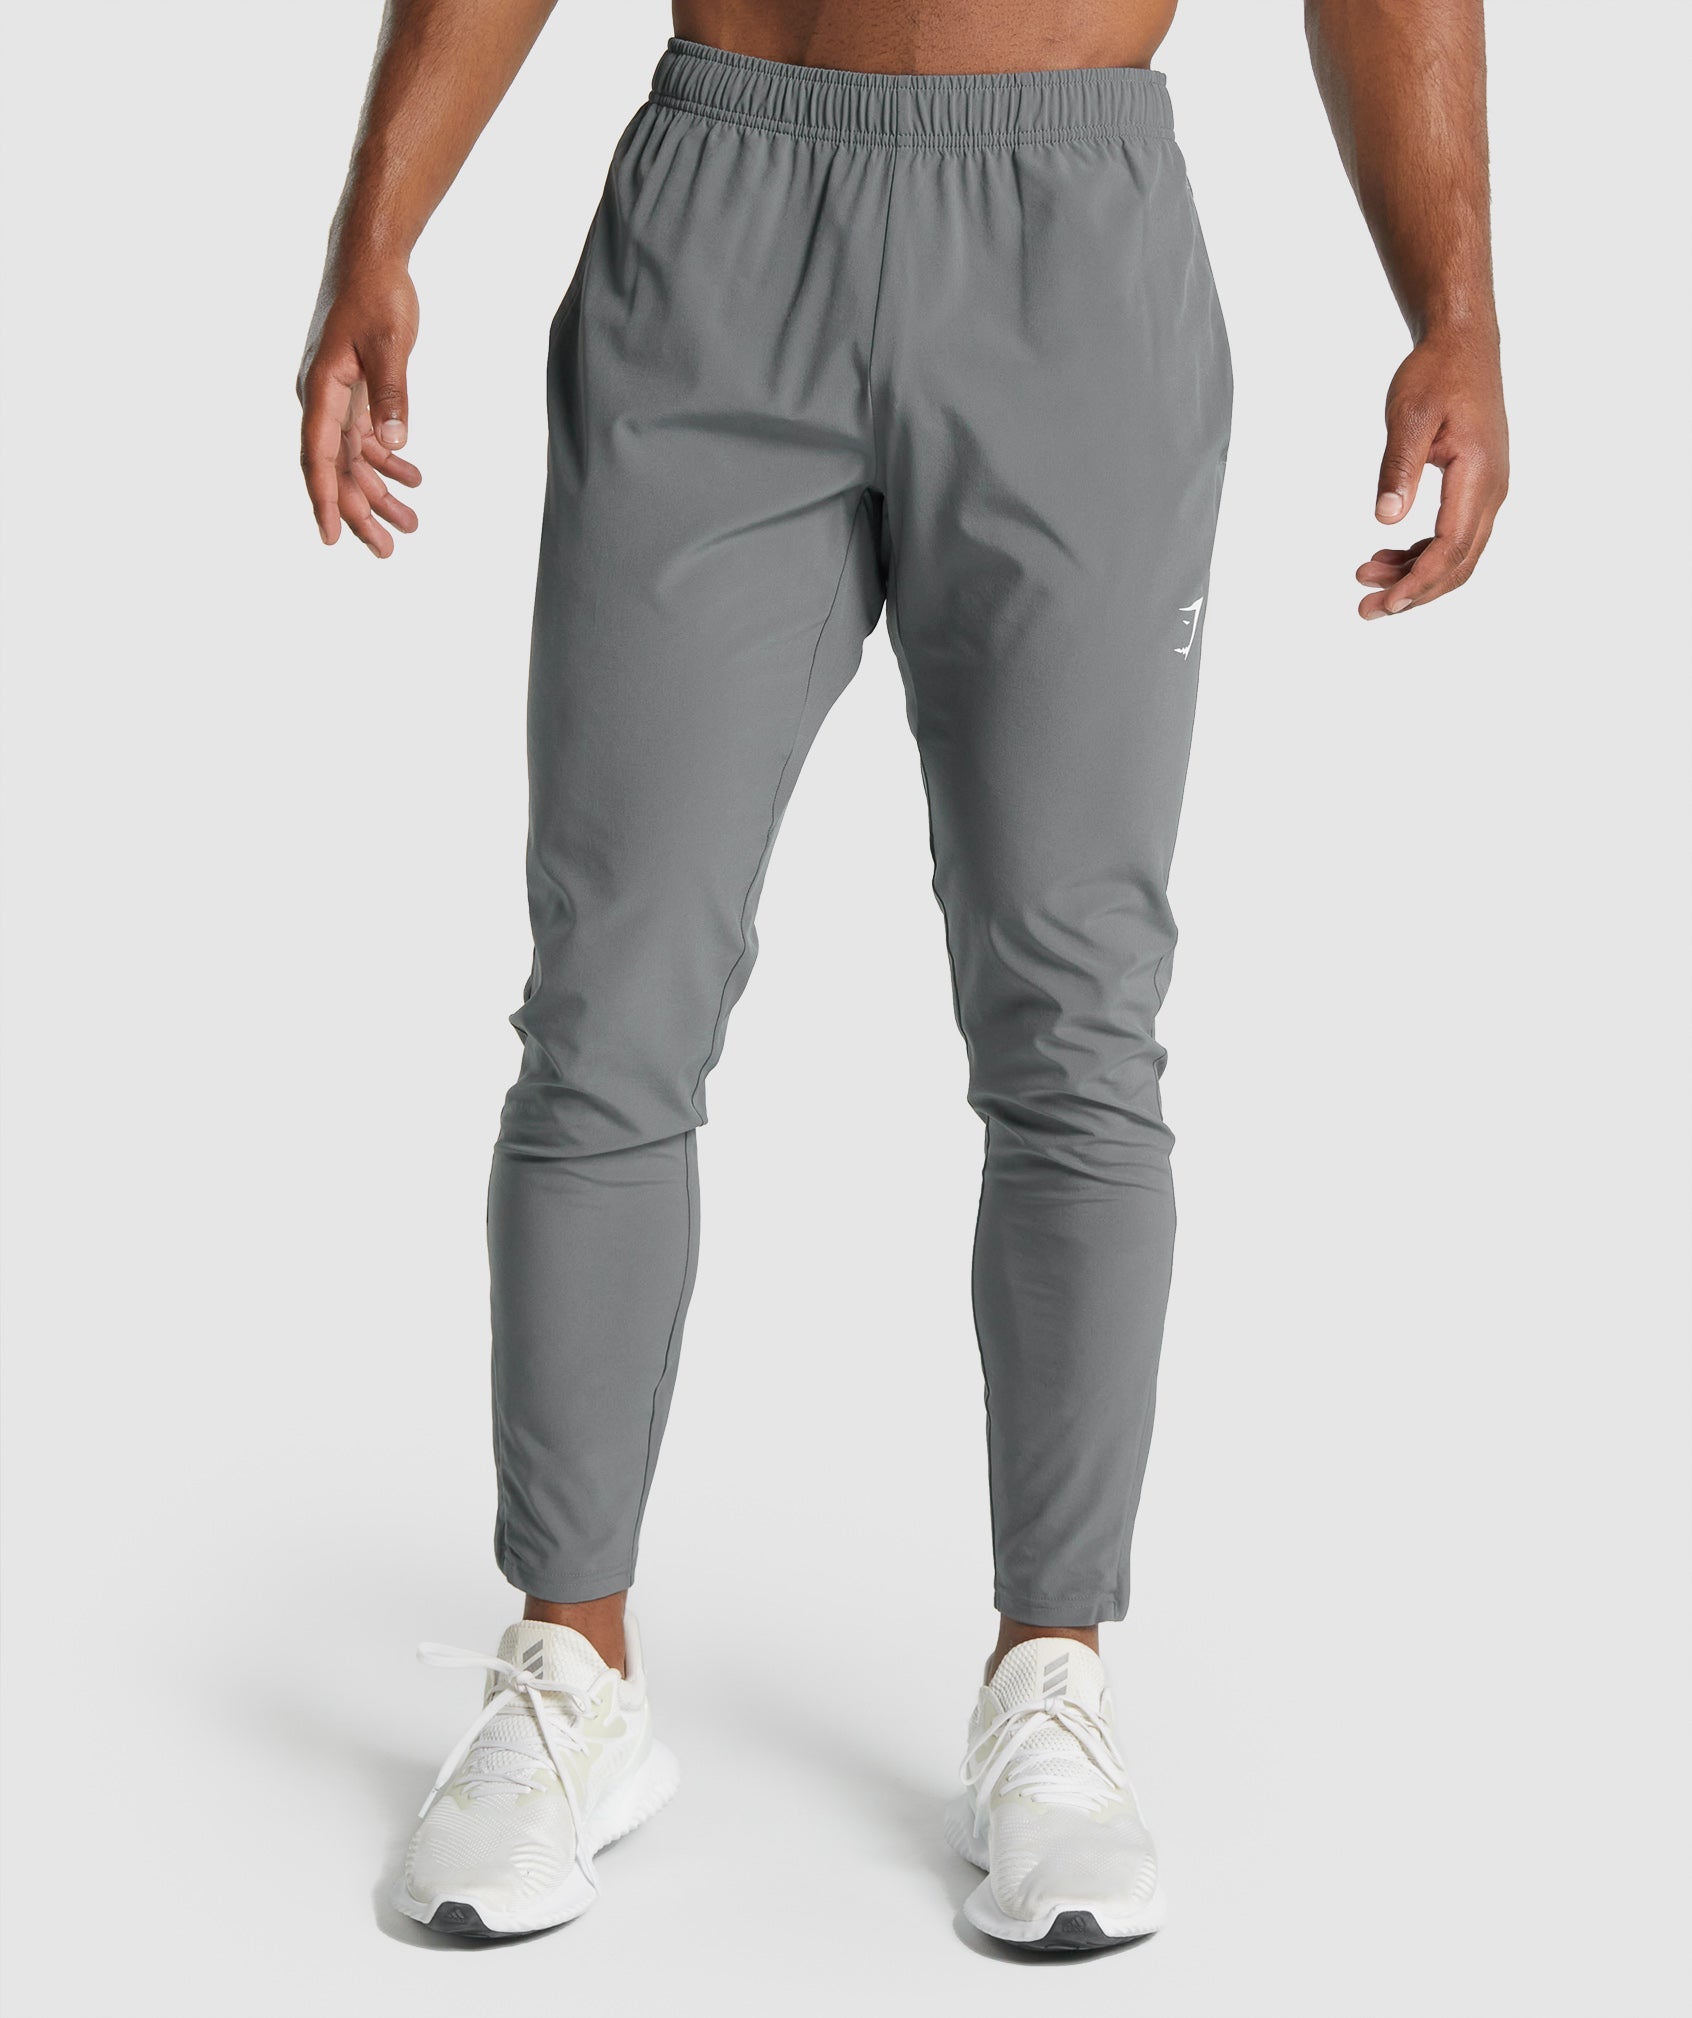 Arrival Woven Joggers in Charcoal Grey